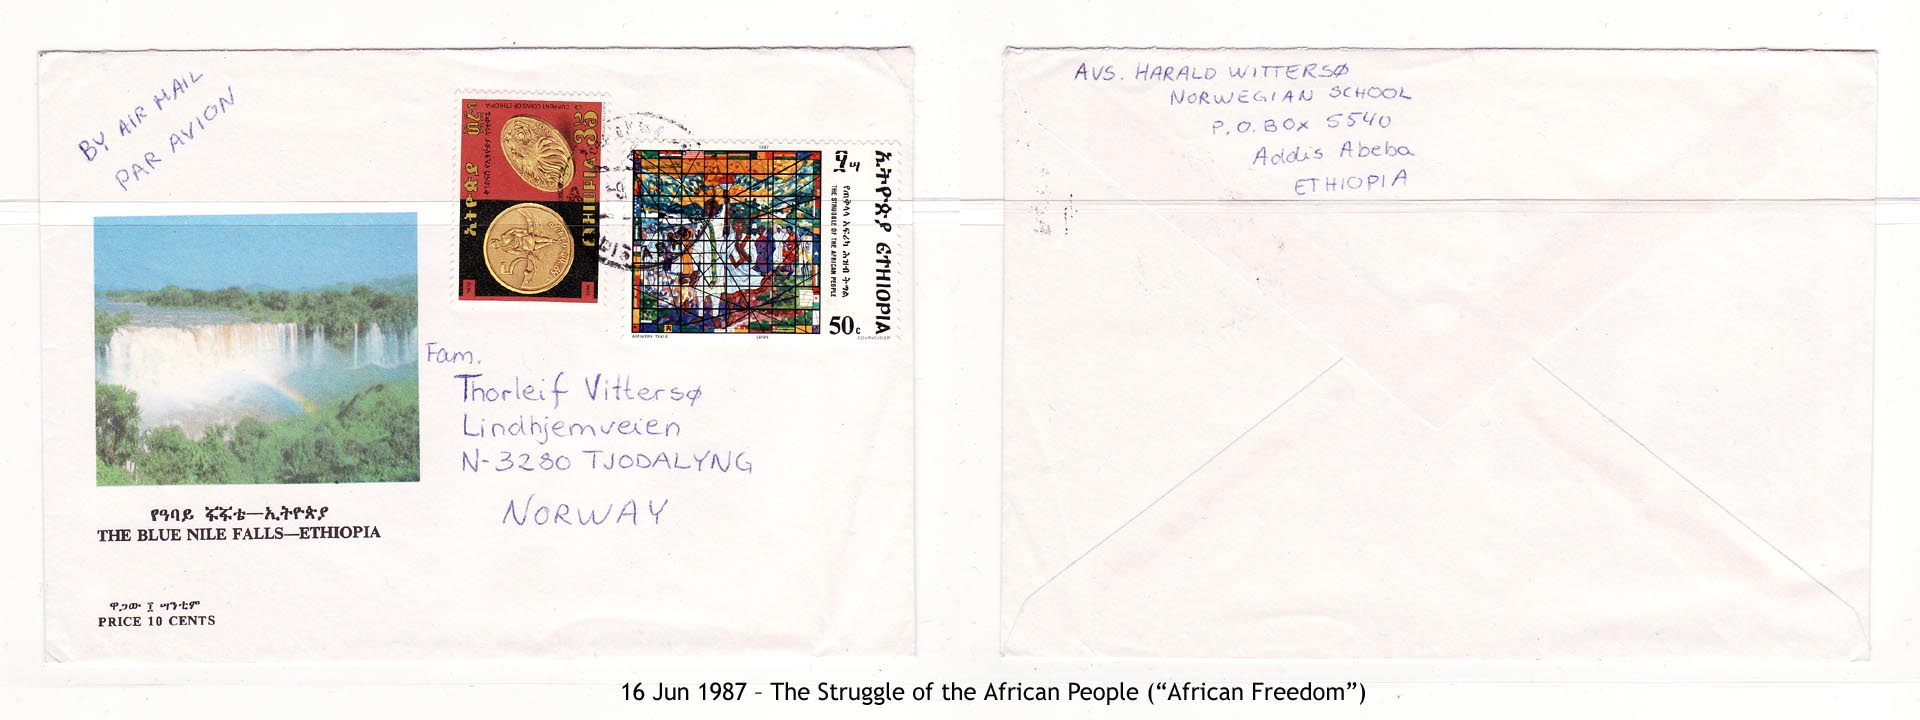 19870616 – The Struggle of the African People (“African Freedom”)